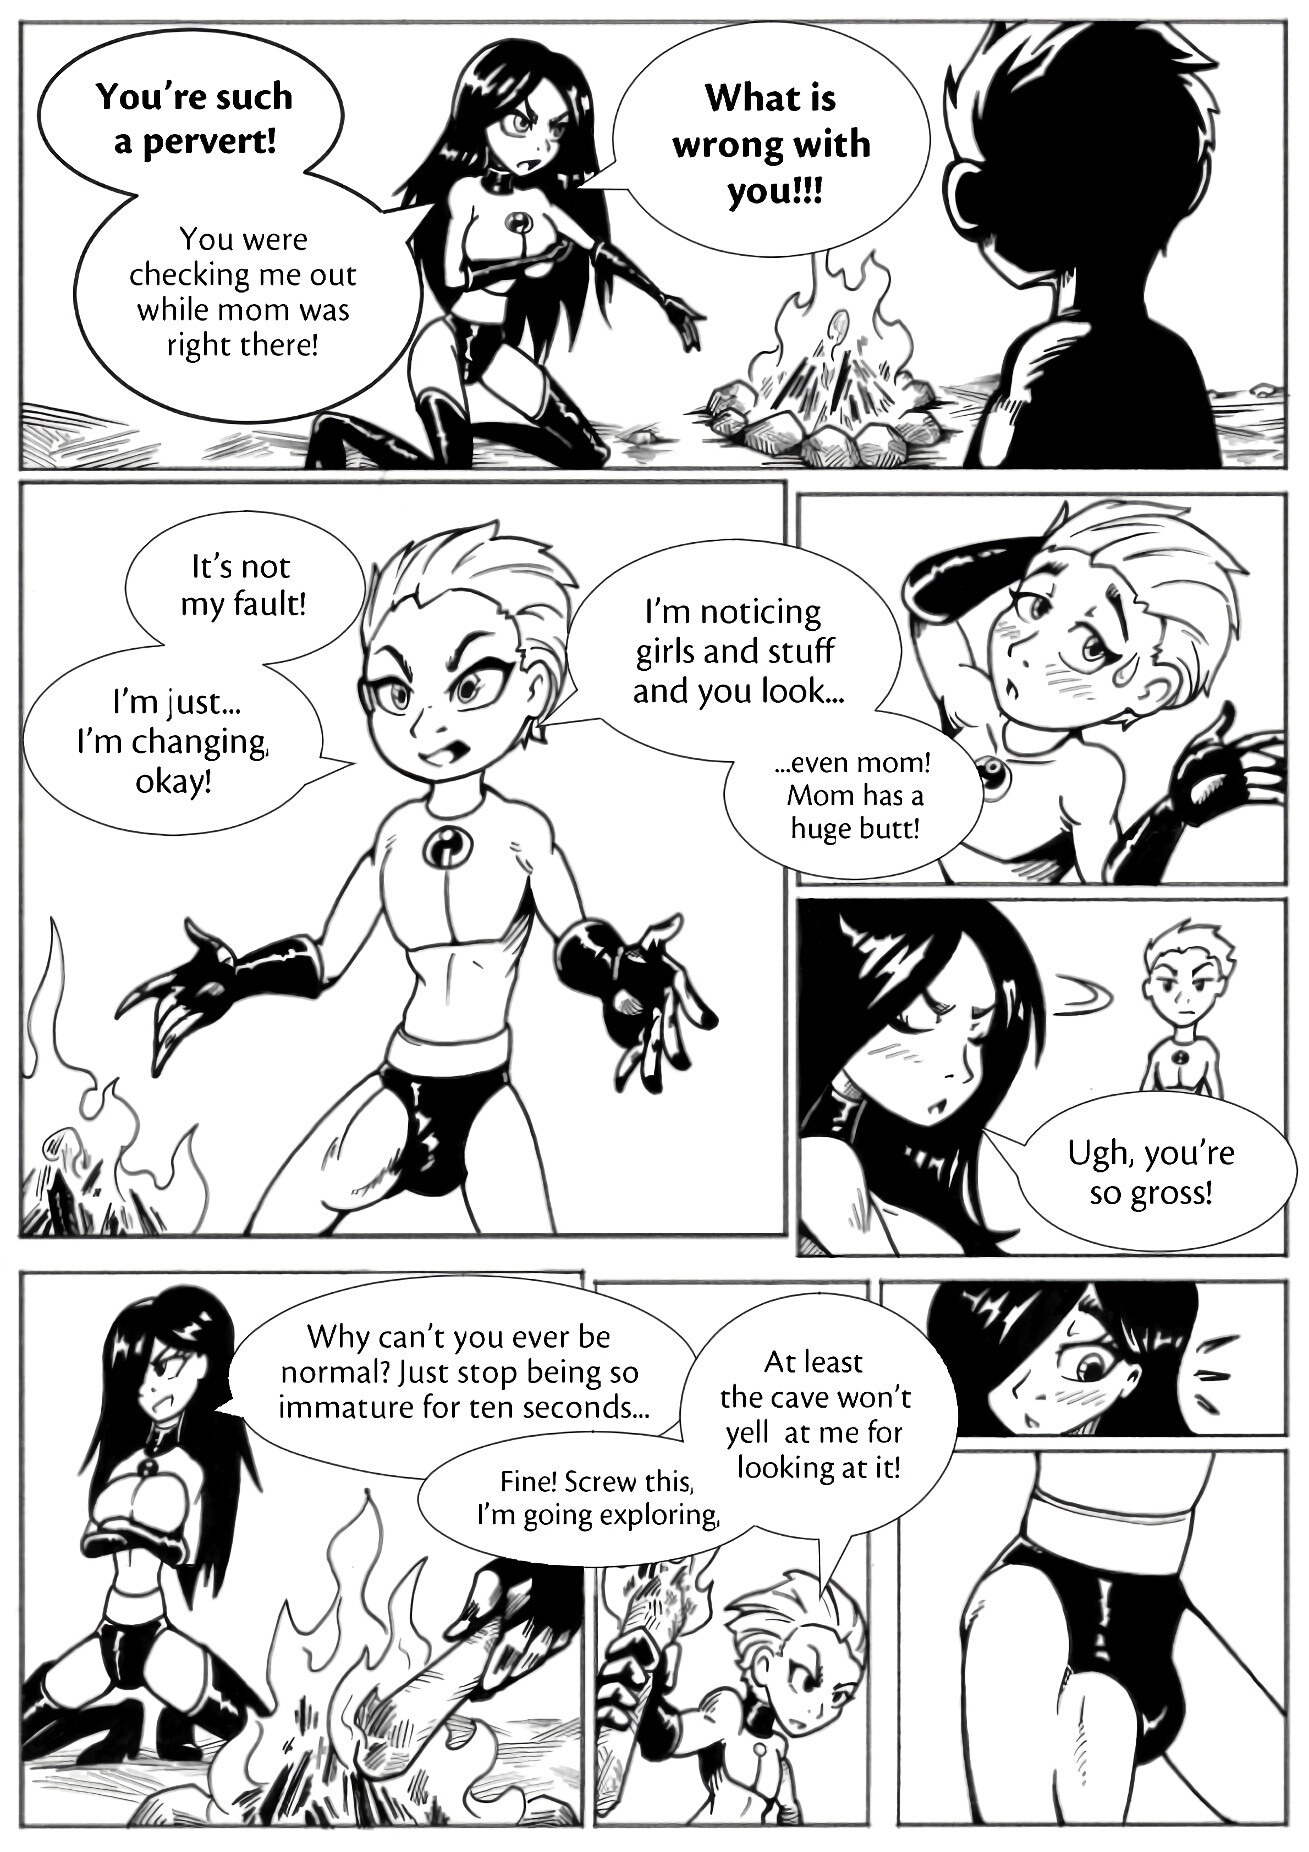 Incestibles - Page 3